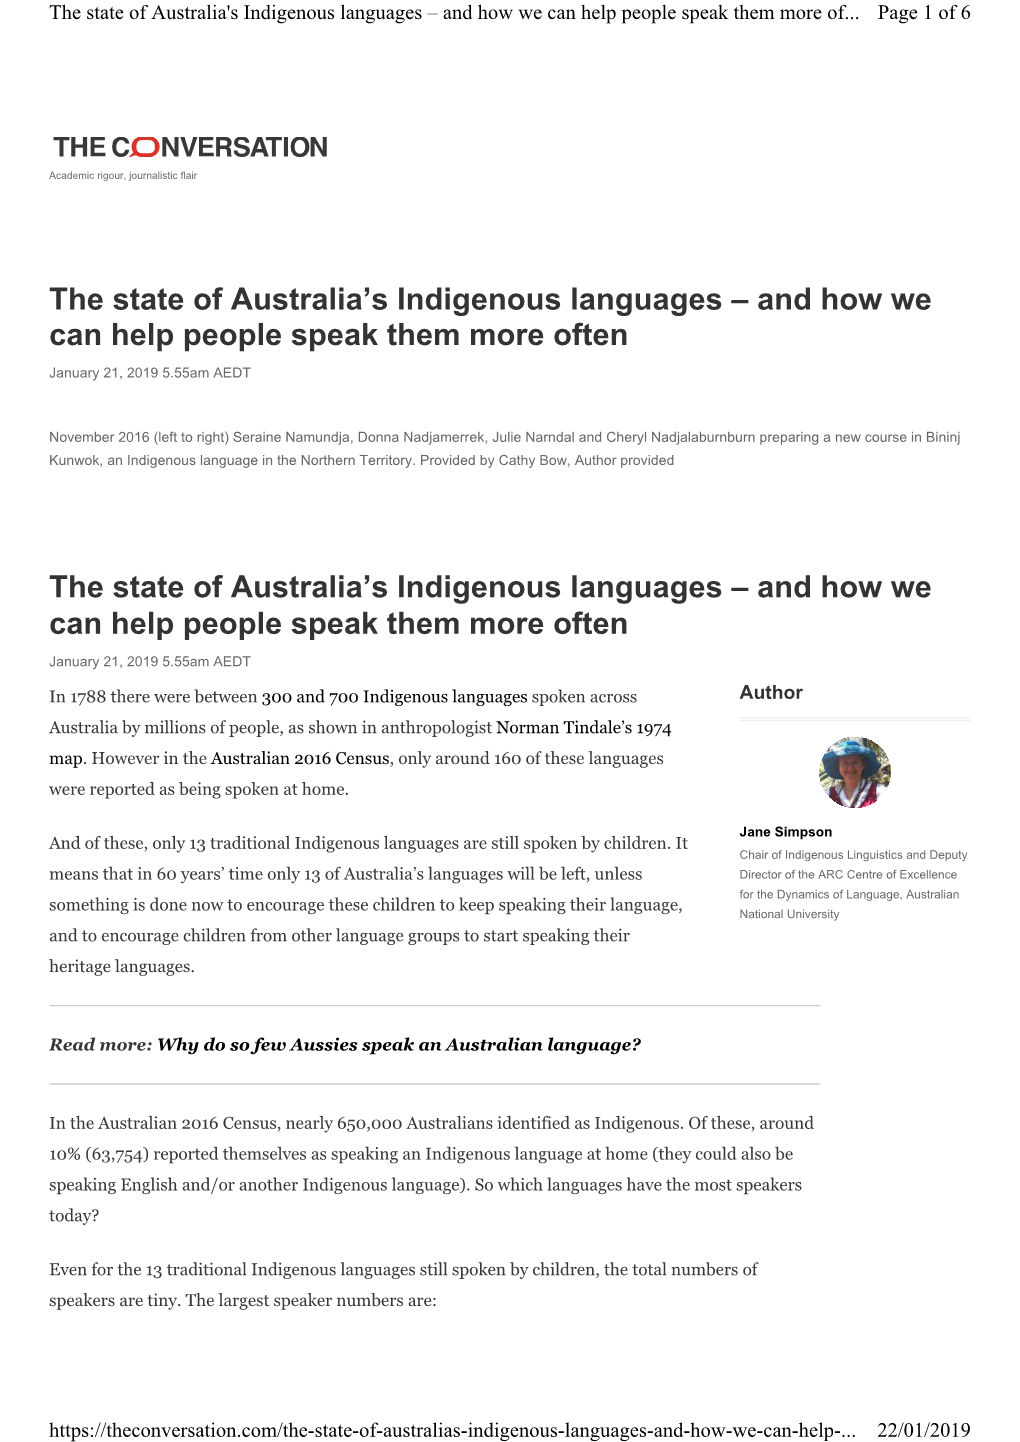 The State of Australia's Indigenous Languages – and How We Can Help People Speak Them More Of